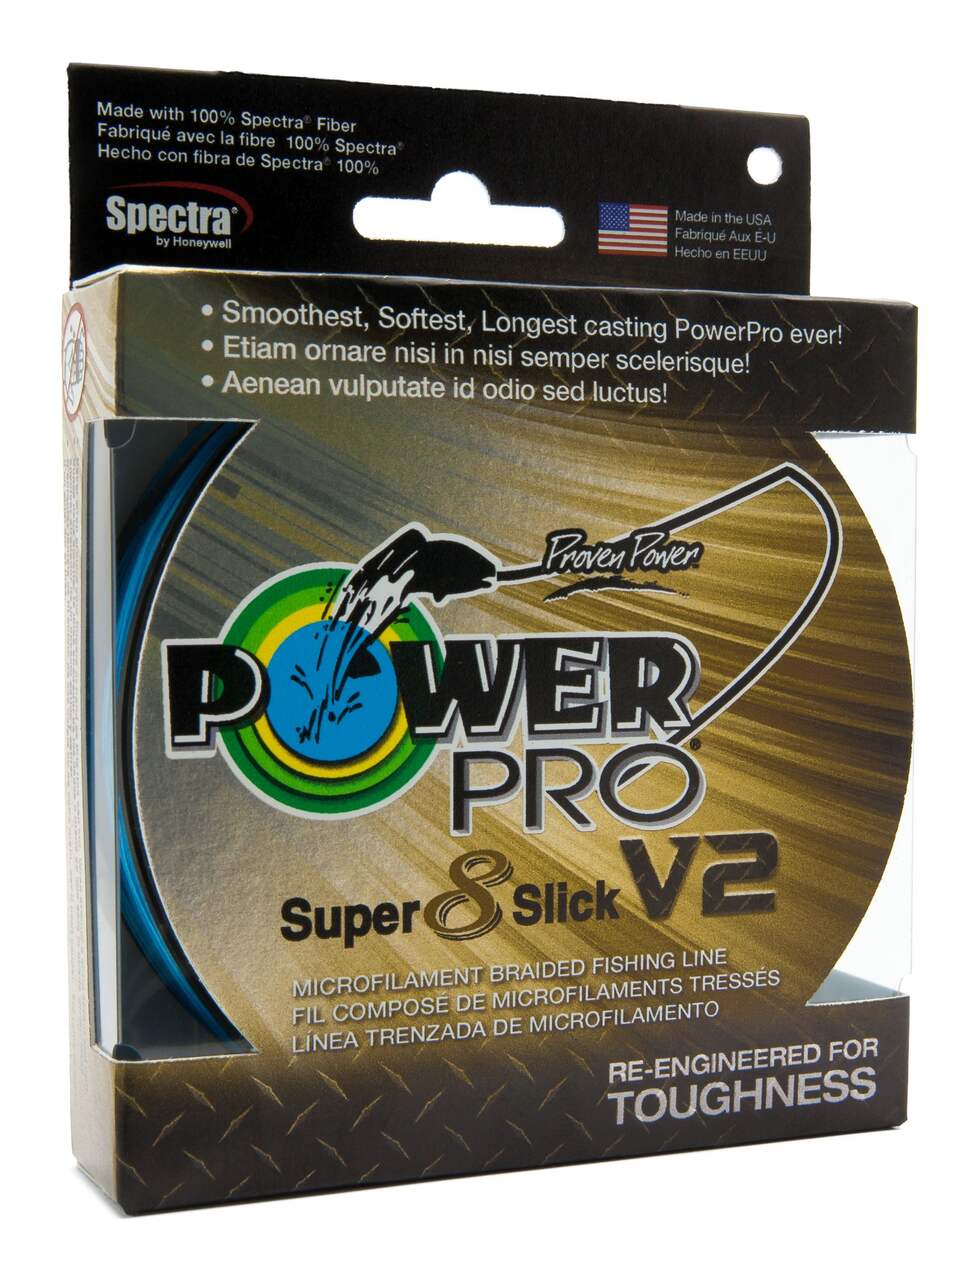  Power Pro Spectra Fiber Braided Fishing Line, Vermilion Red,  150YD/15LB : Superbraid And Braided Fishing Line : Sports & Outdoors